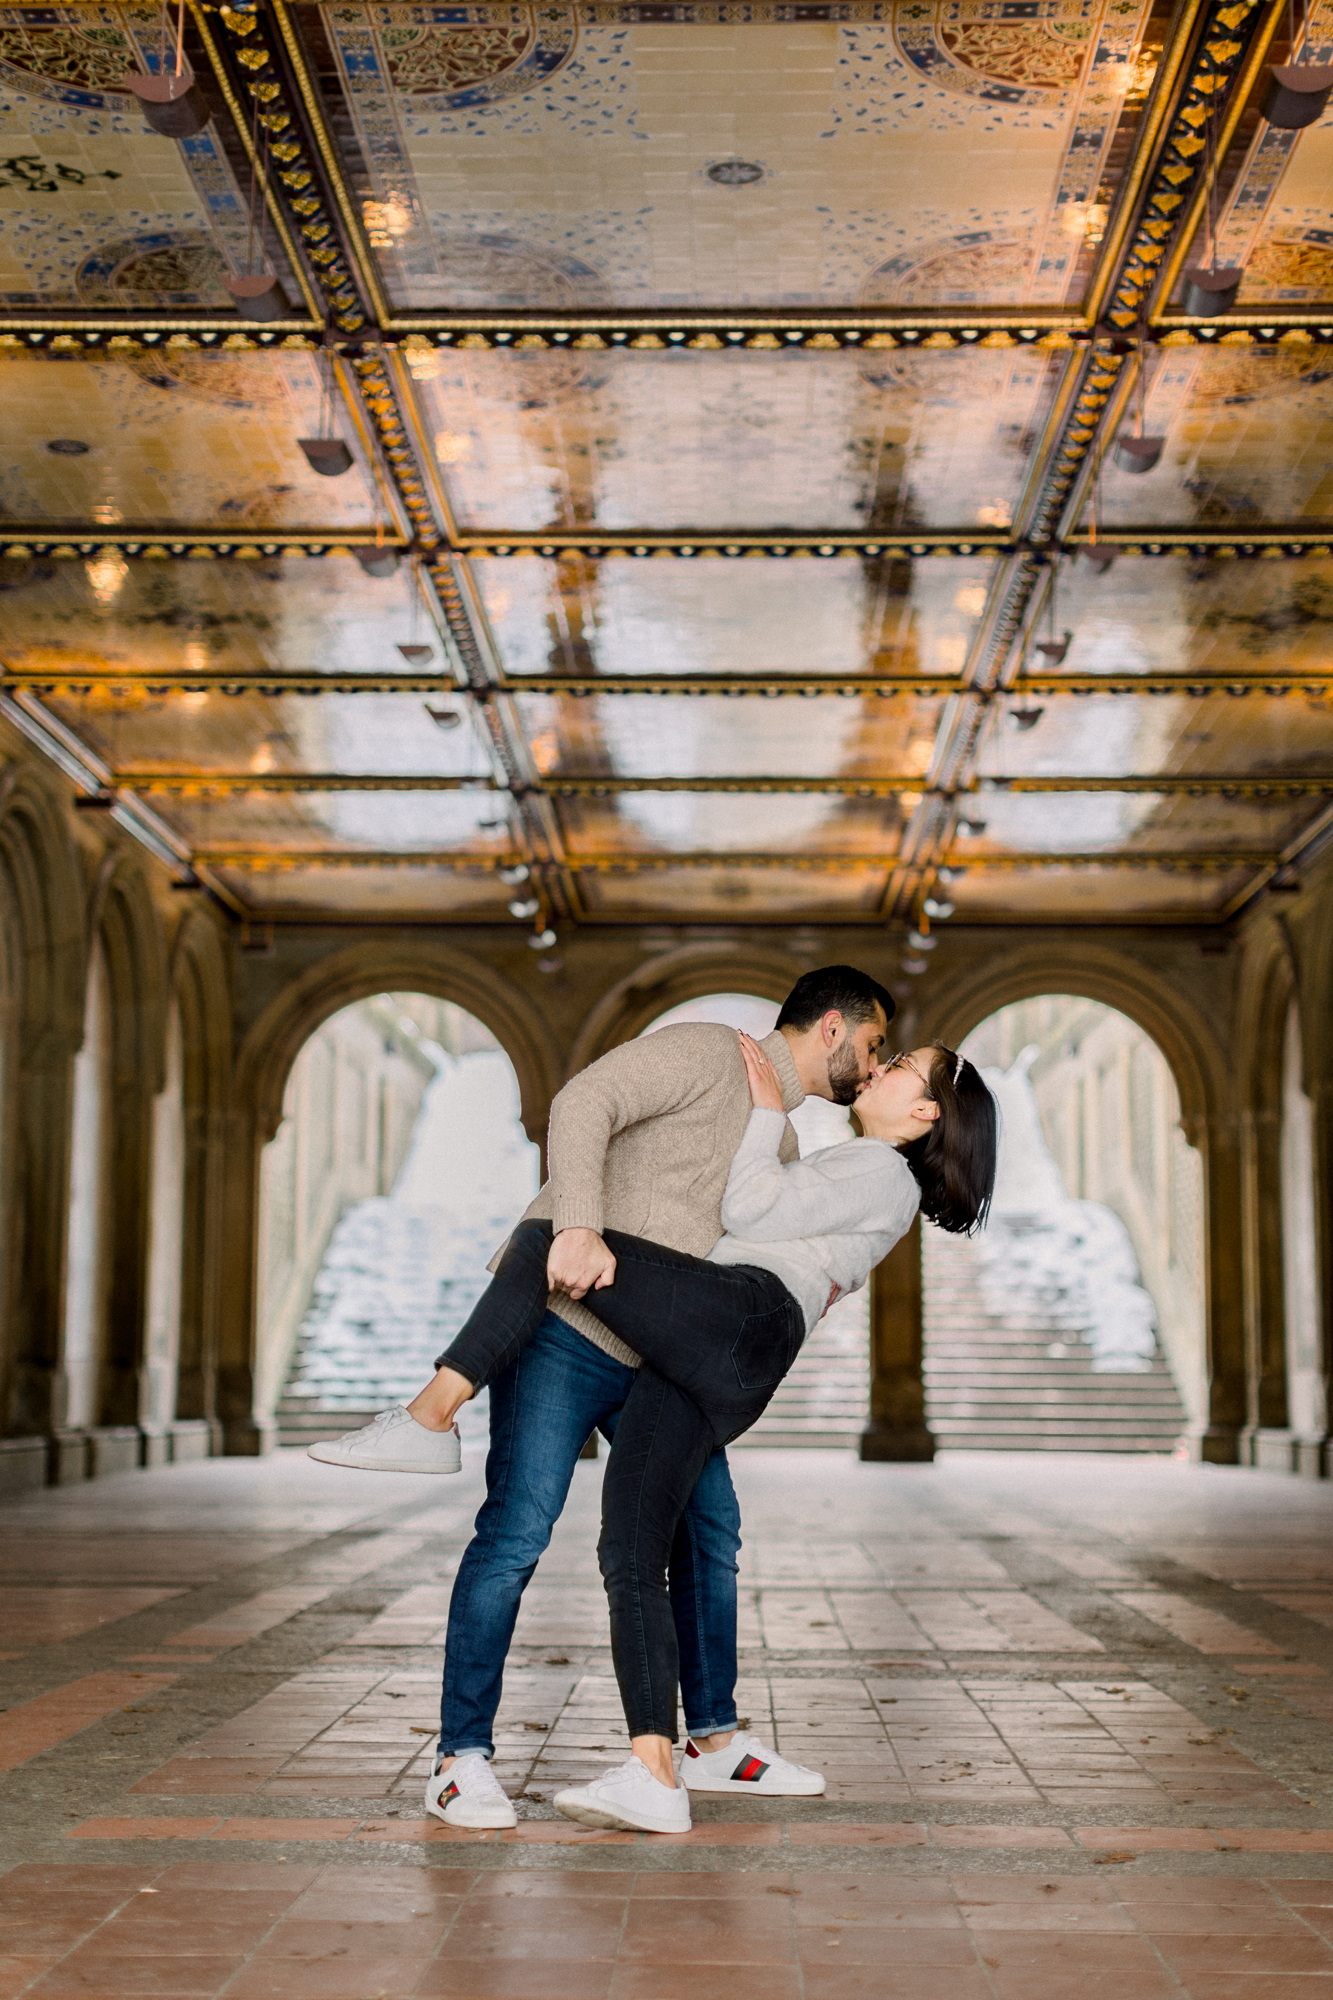 Top Engagement Photo Locations in Central Park